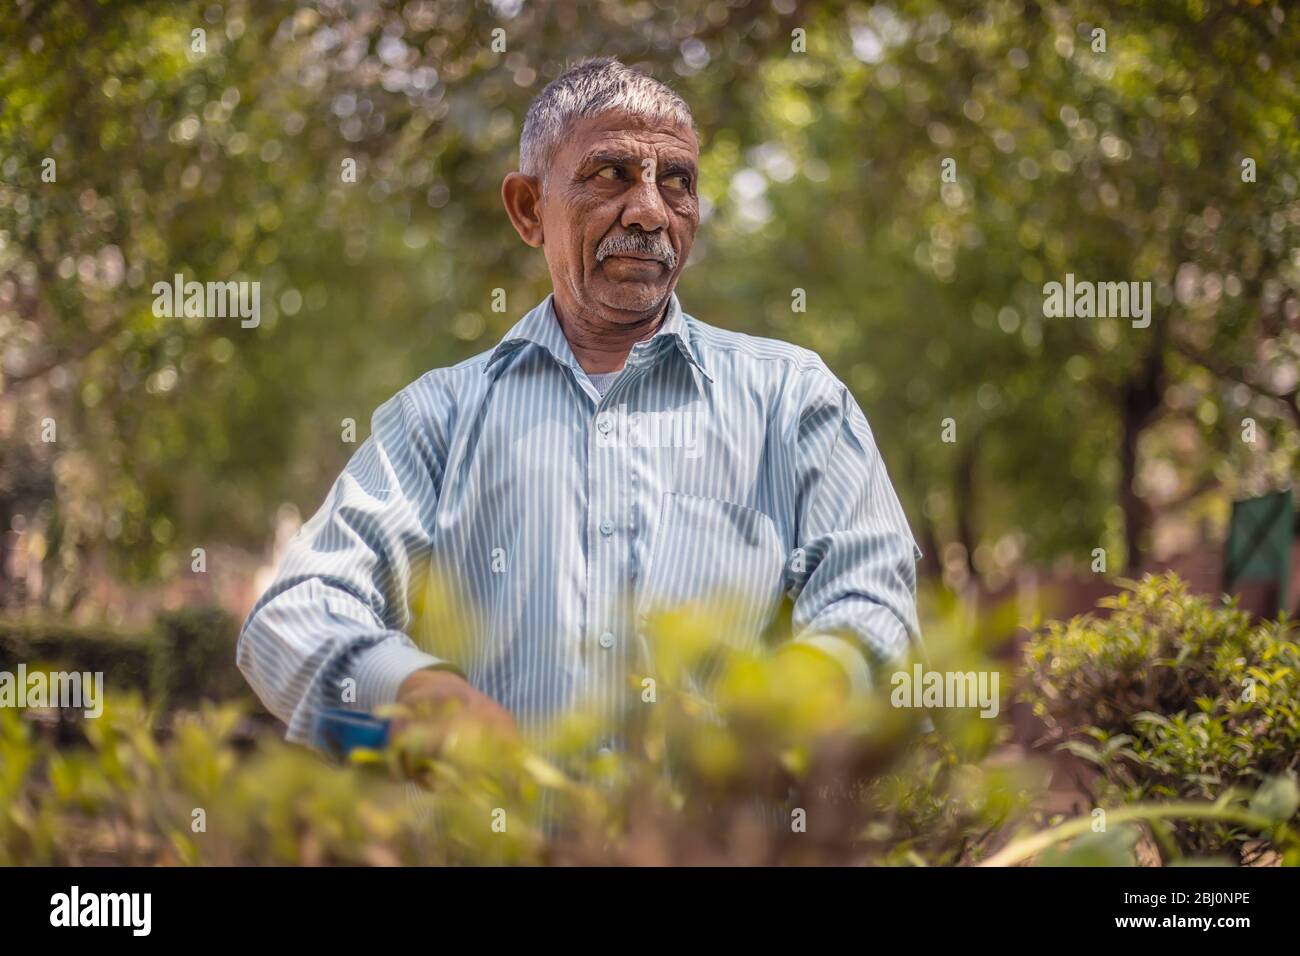 Gardener taking care of the garden by trimming bushes. (Common man) Stock Photo